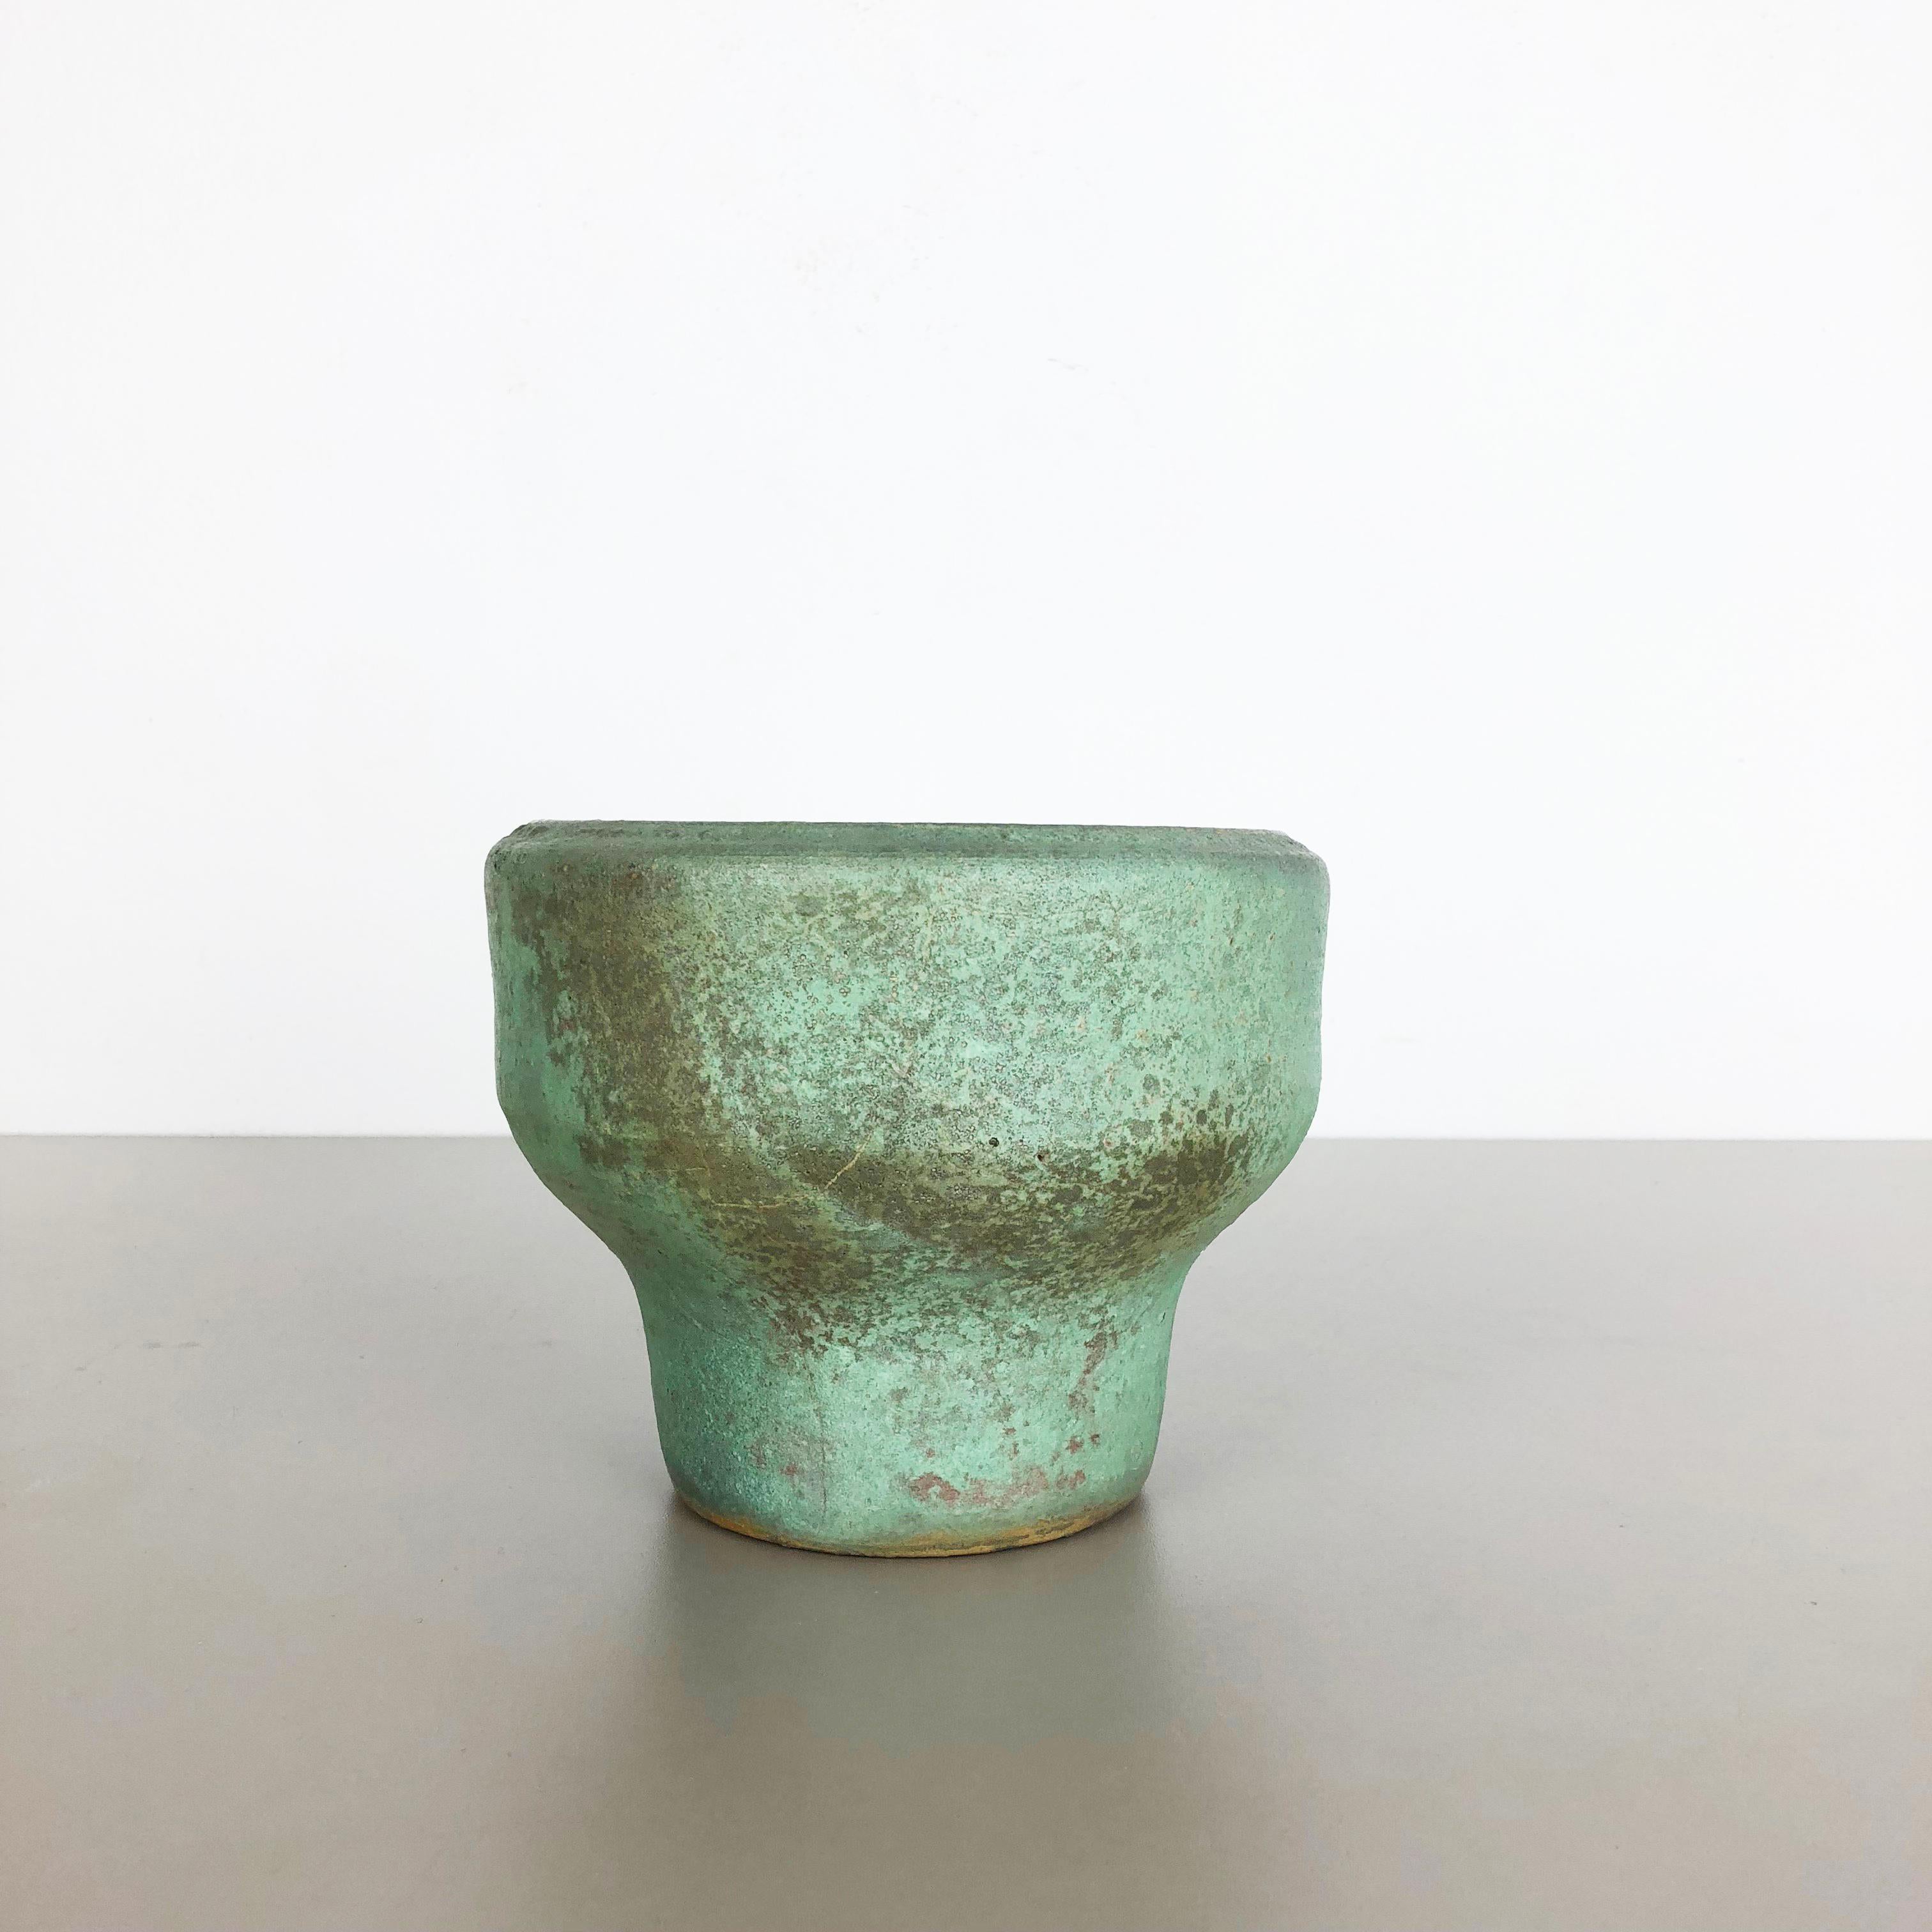 Article:

Ceramic vase


Producer:

Mobach, Netherlands


Designer:

Piet Knepper




Decade:

1960-1965



Description:

This original vintage studio pottery vase was produced in the 1960s by Piet Knepper for Mobach in